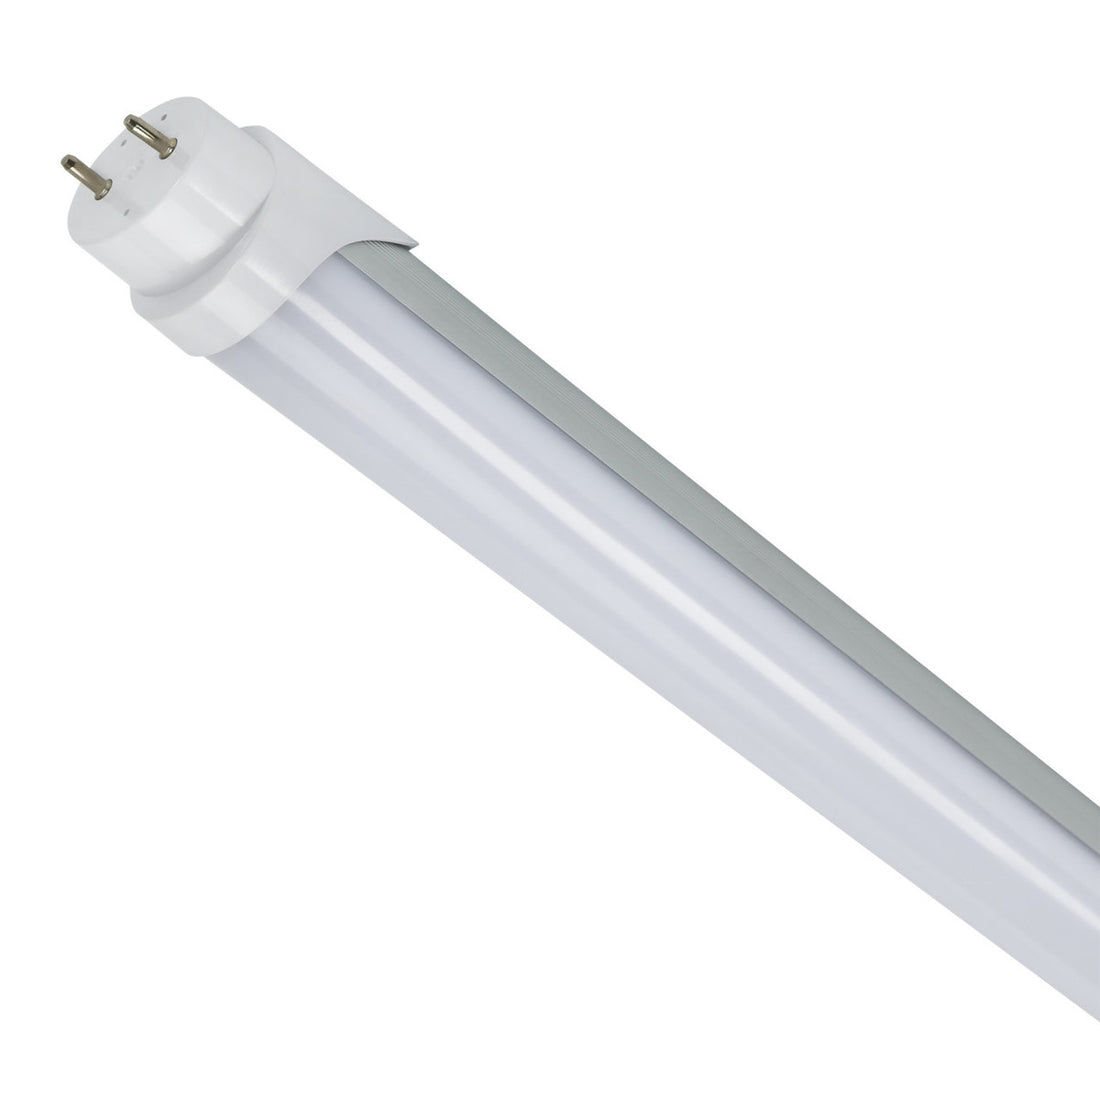 2ft LED Tube - 8W/10W/12W Wattage-Tunable - 4000K 100-277VAC Input, Switch Dimming, 140¬∞ Beam Angle, Frosted Lens, Circular Aluminum Housing, Two-End Input - 42 Pack